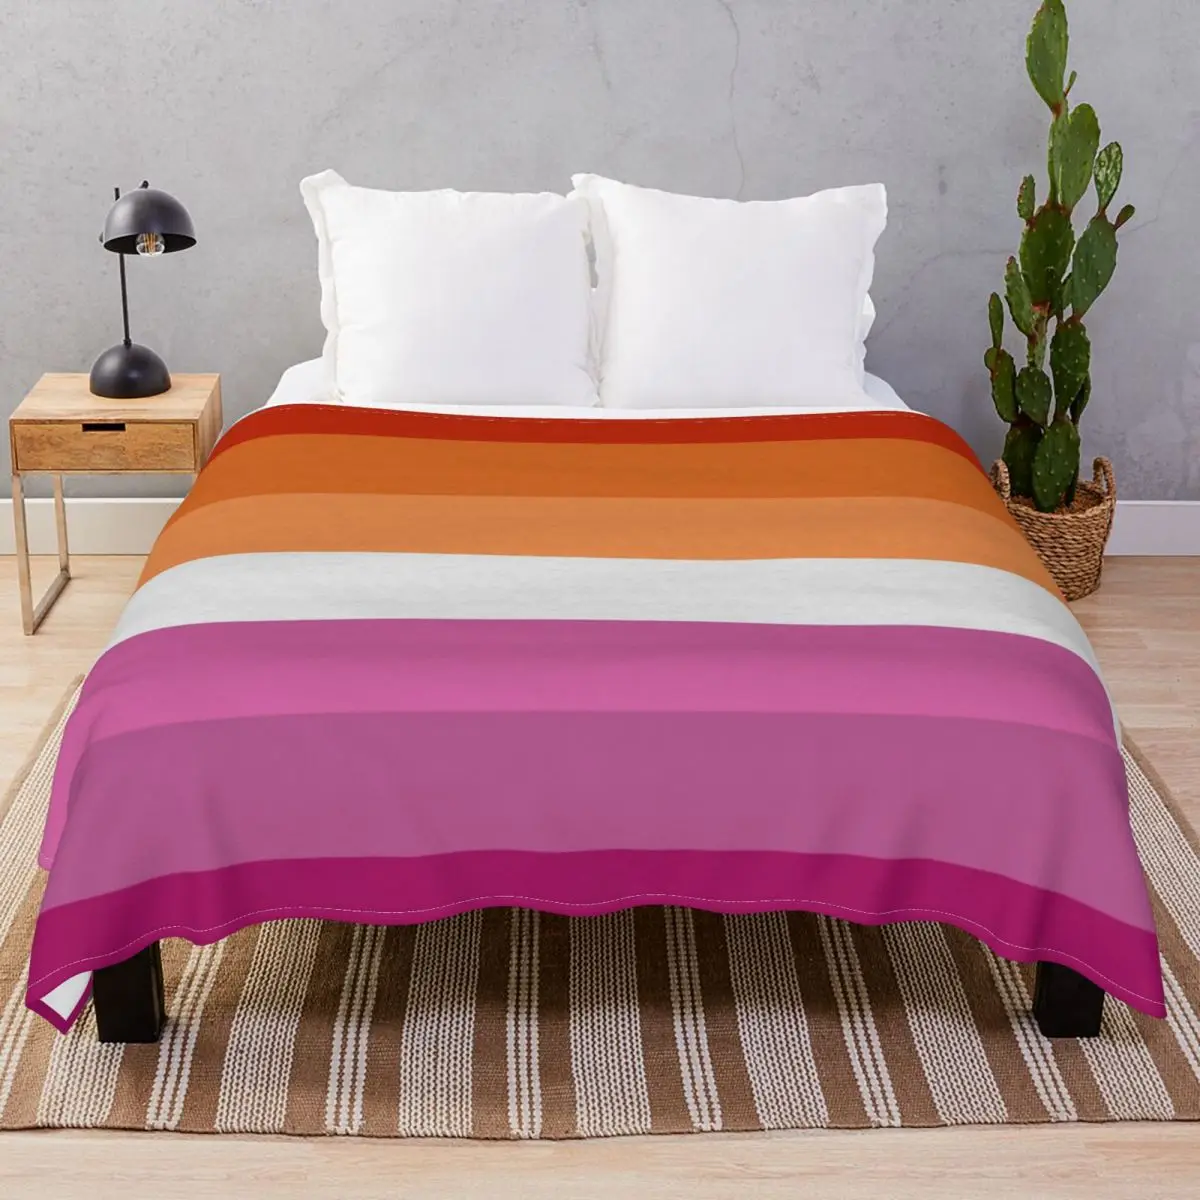 New Lesbian Flag Expanded Blankets Velvet Spring Autumn Lightweight Thin Throw Blanket for Bed Home Couch Camp Cinema